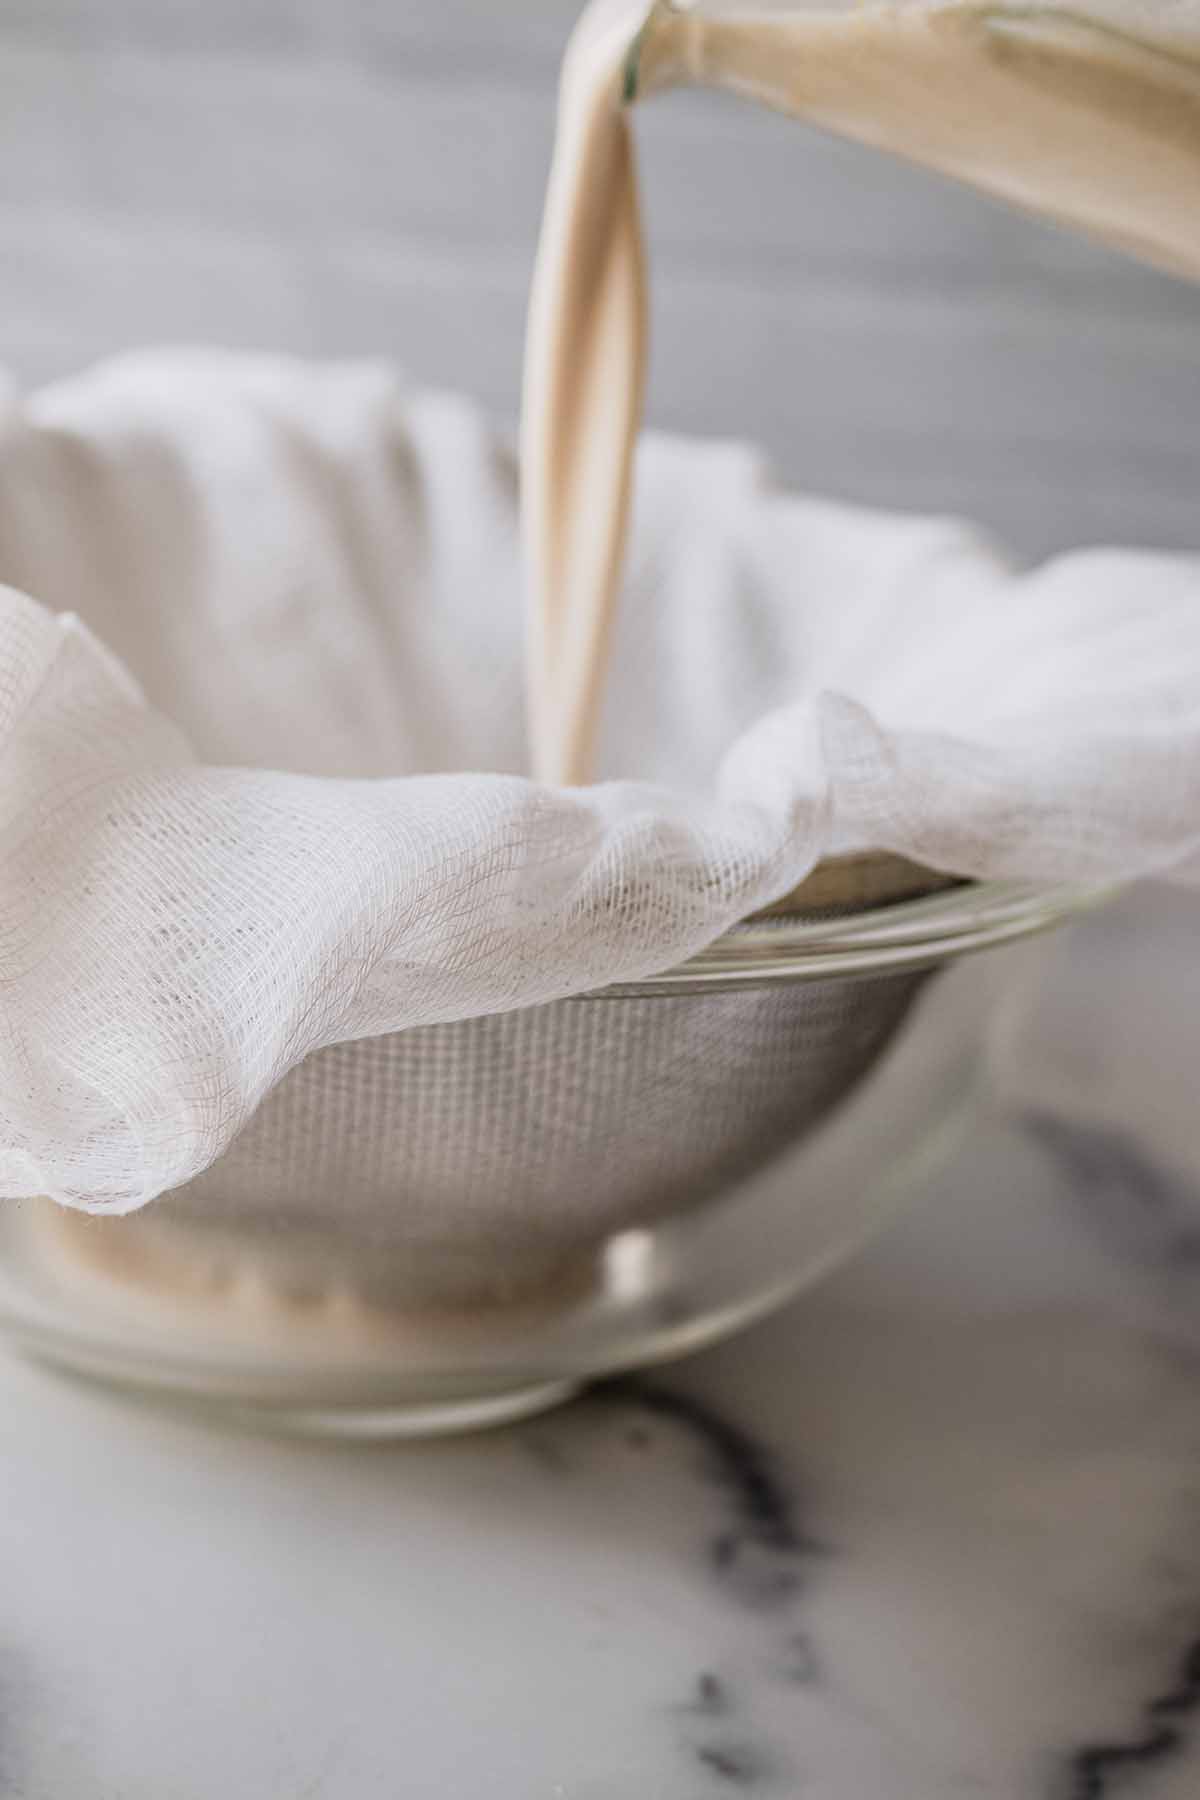 Nut milk being poured into a cheese cloth and mesh strainer into a glass bowl